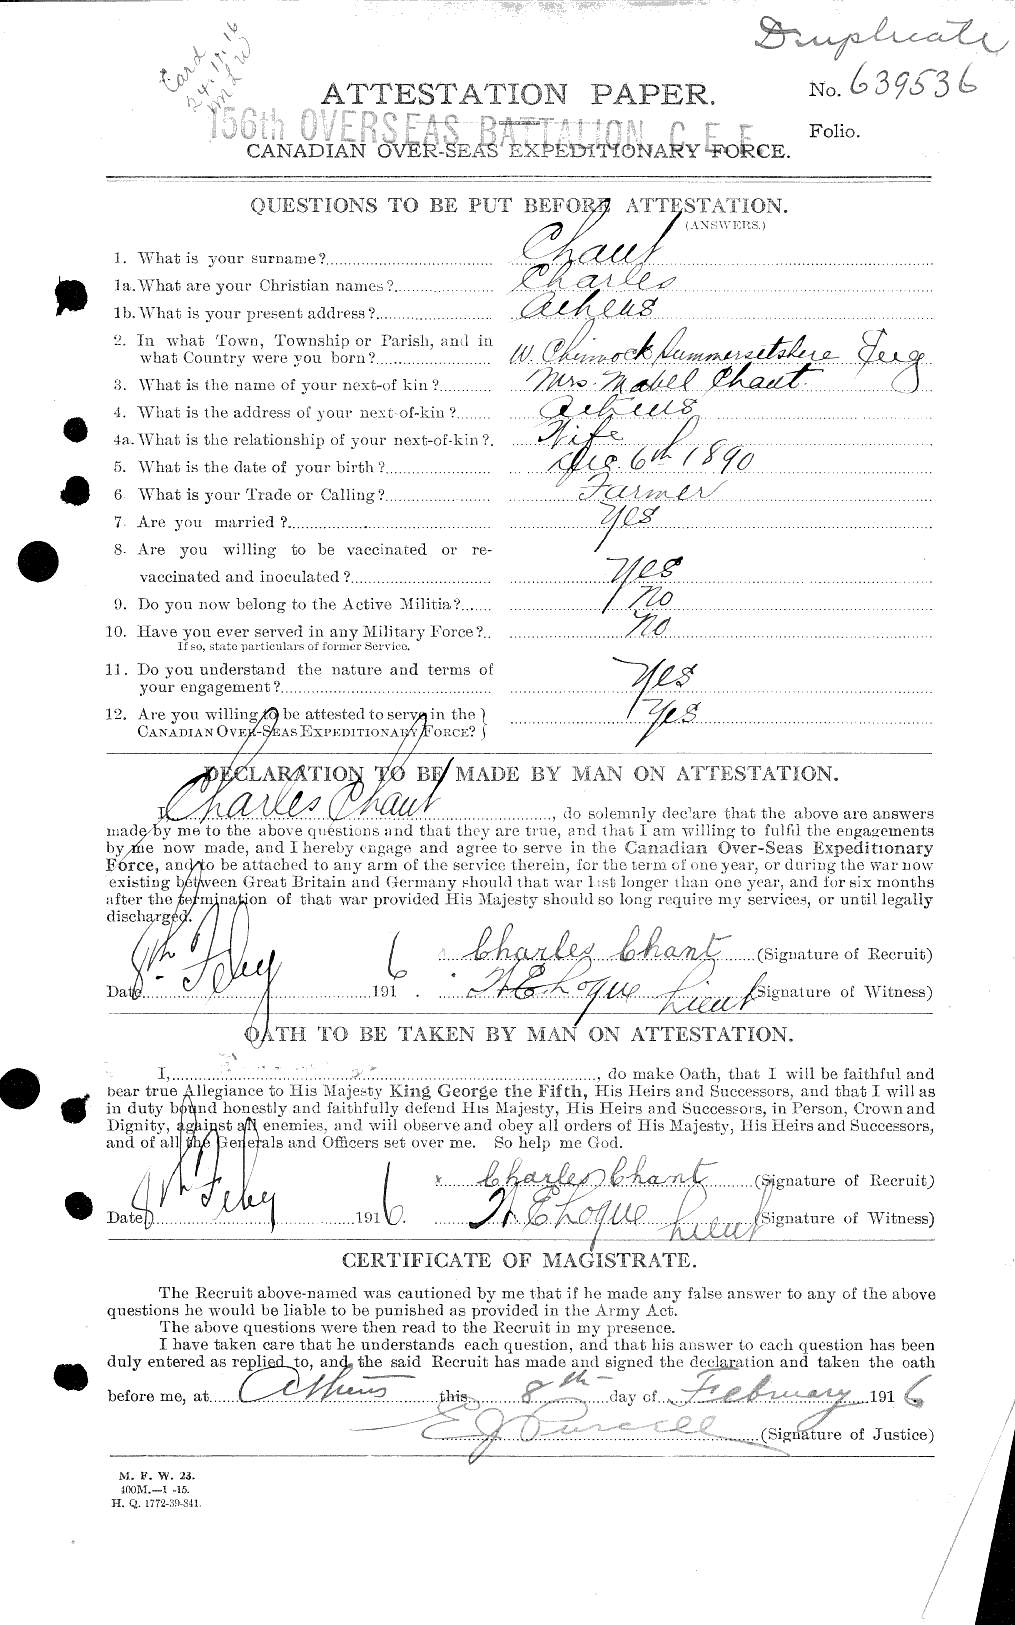 Personnel Records of the First World War - CEF 013853a